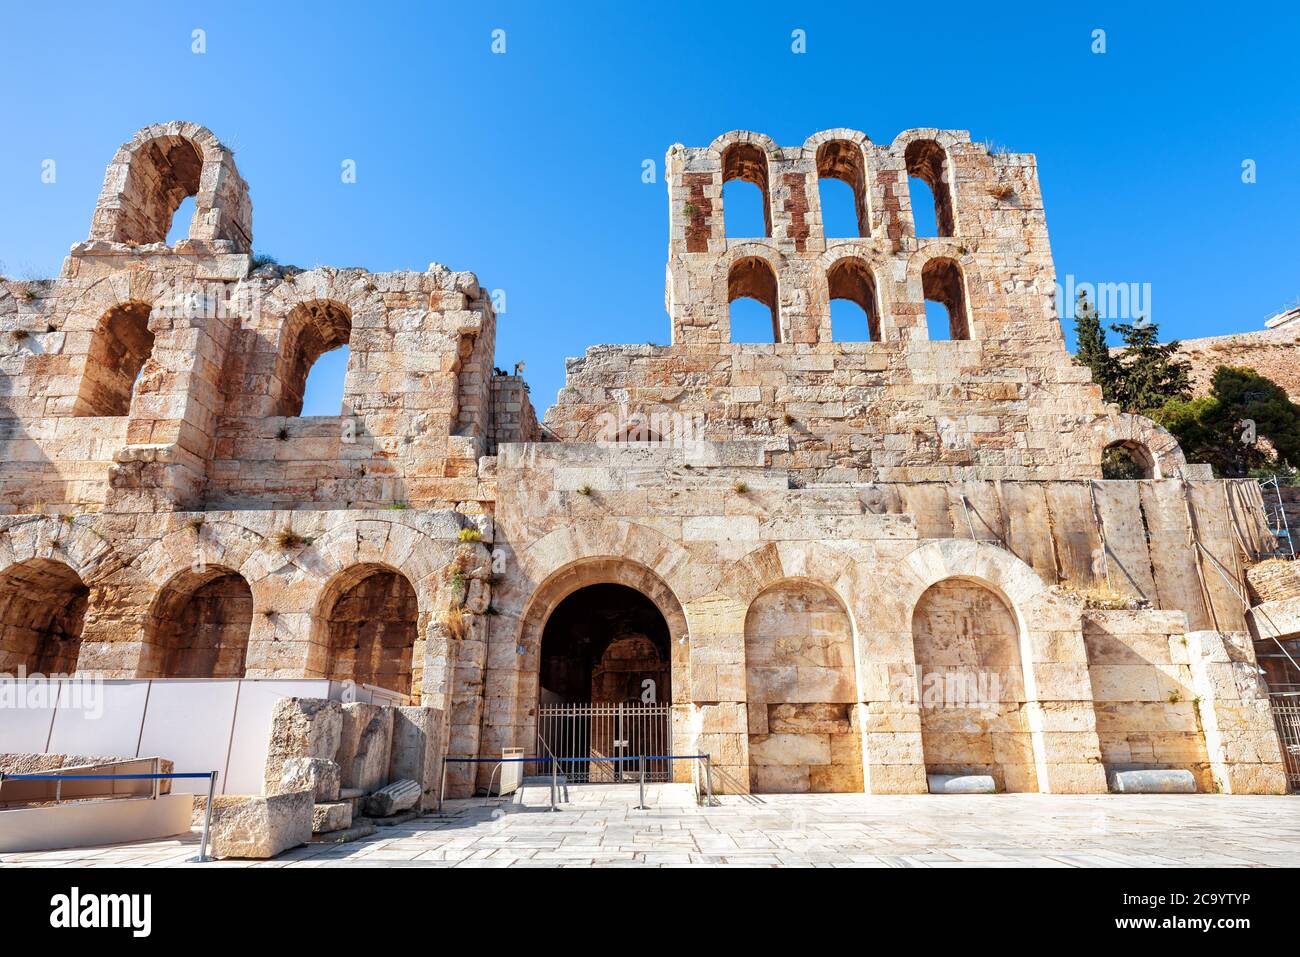 Odeon of Herodes Atticus at Acropolis of Athens, Greece. It is one of main landmarks of Athens. Monument of classical Greek culture, ancient theater i Stock Photo